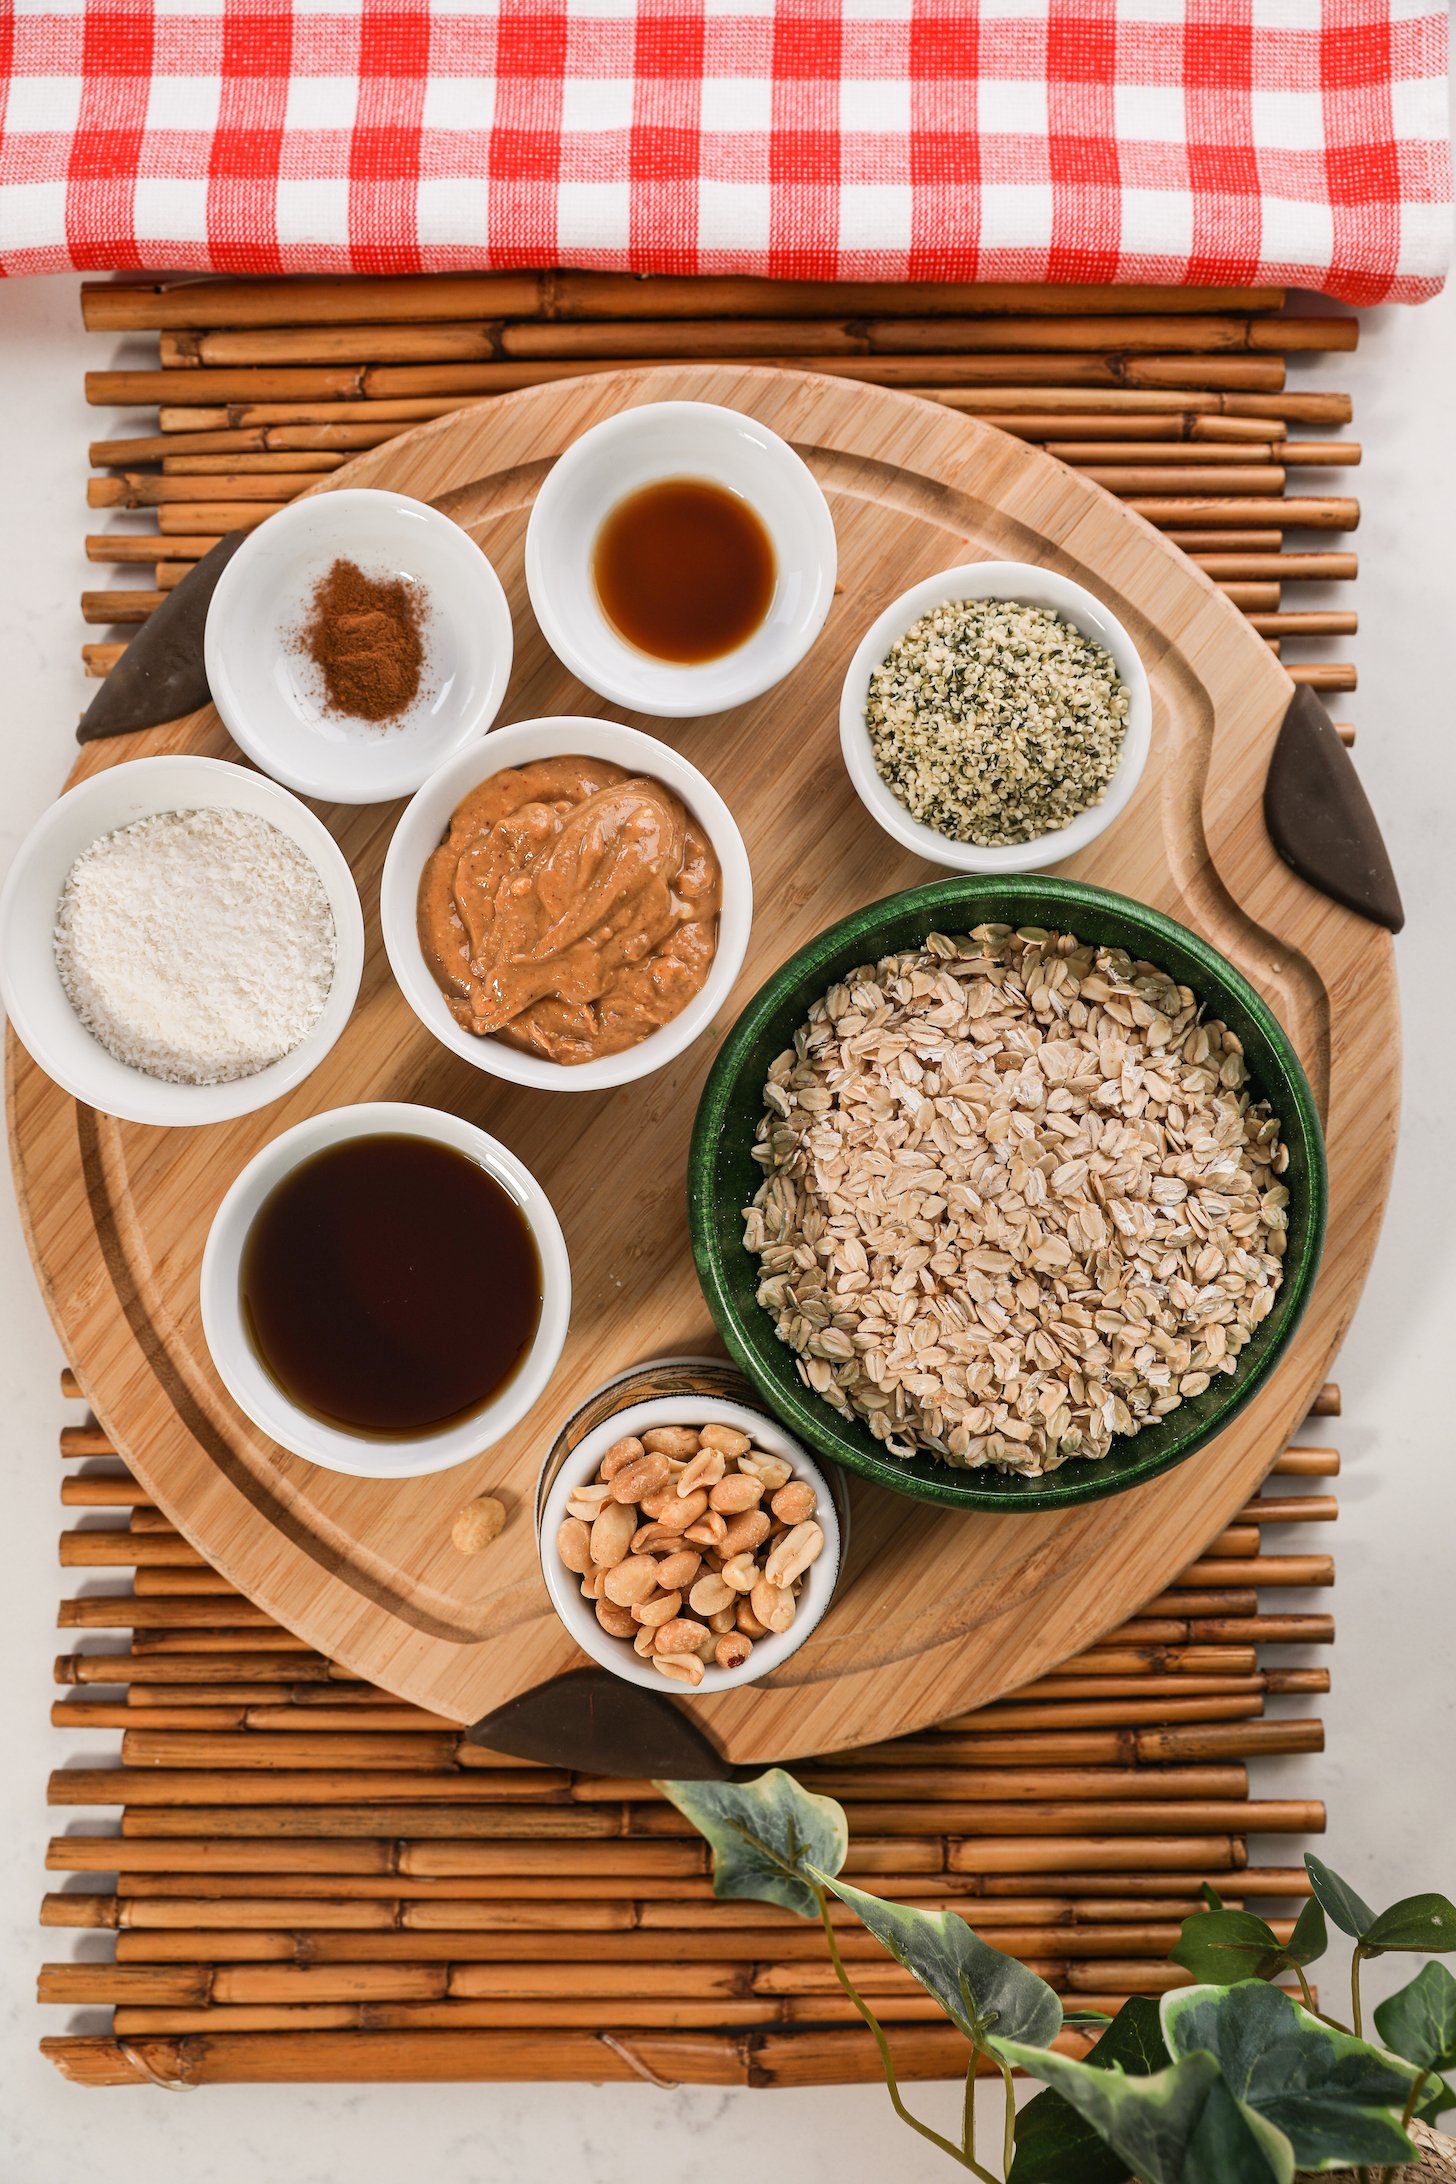 An array of food ingredients like oats, peanut butter, seeds and nuts on a wooden board.